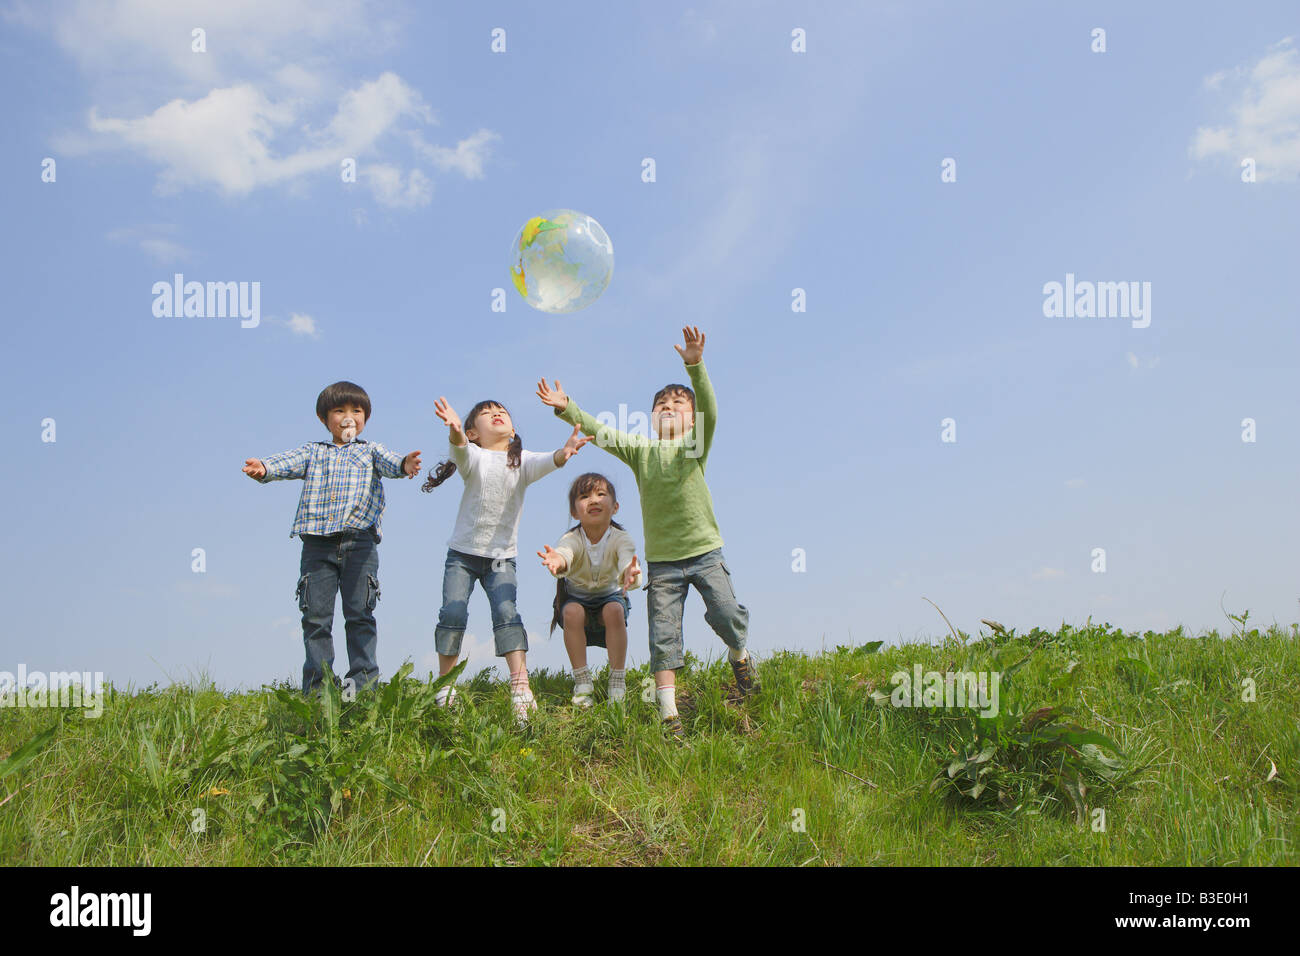 Children playing in park together Stock Photo